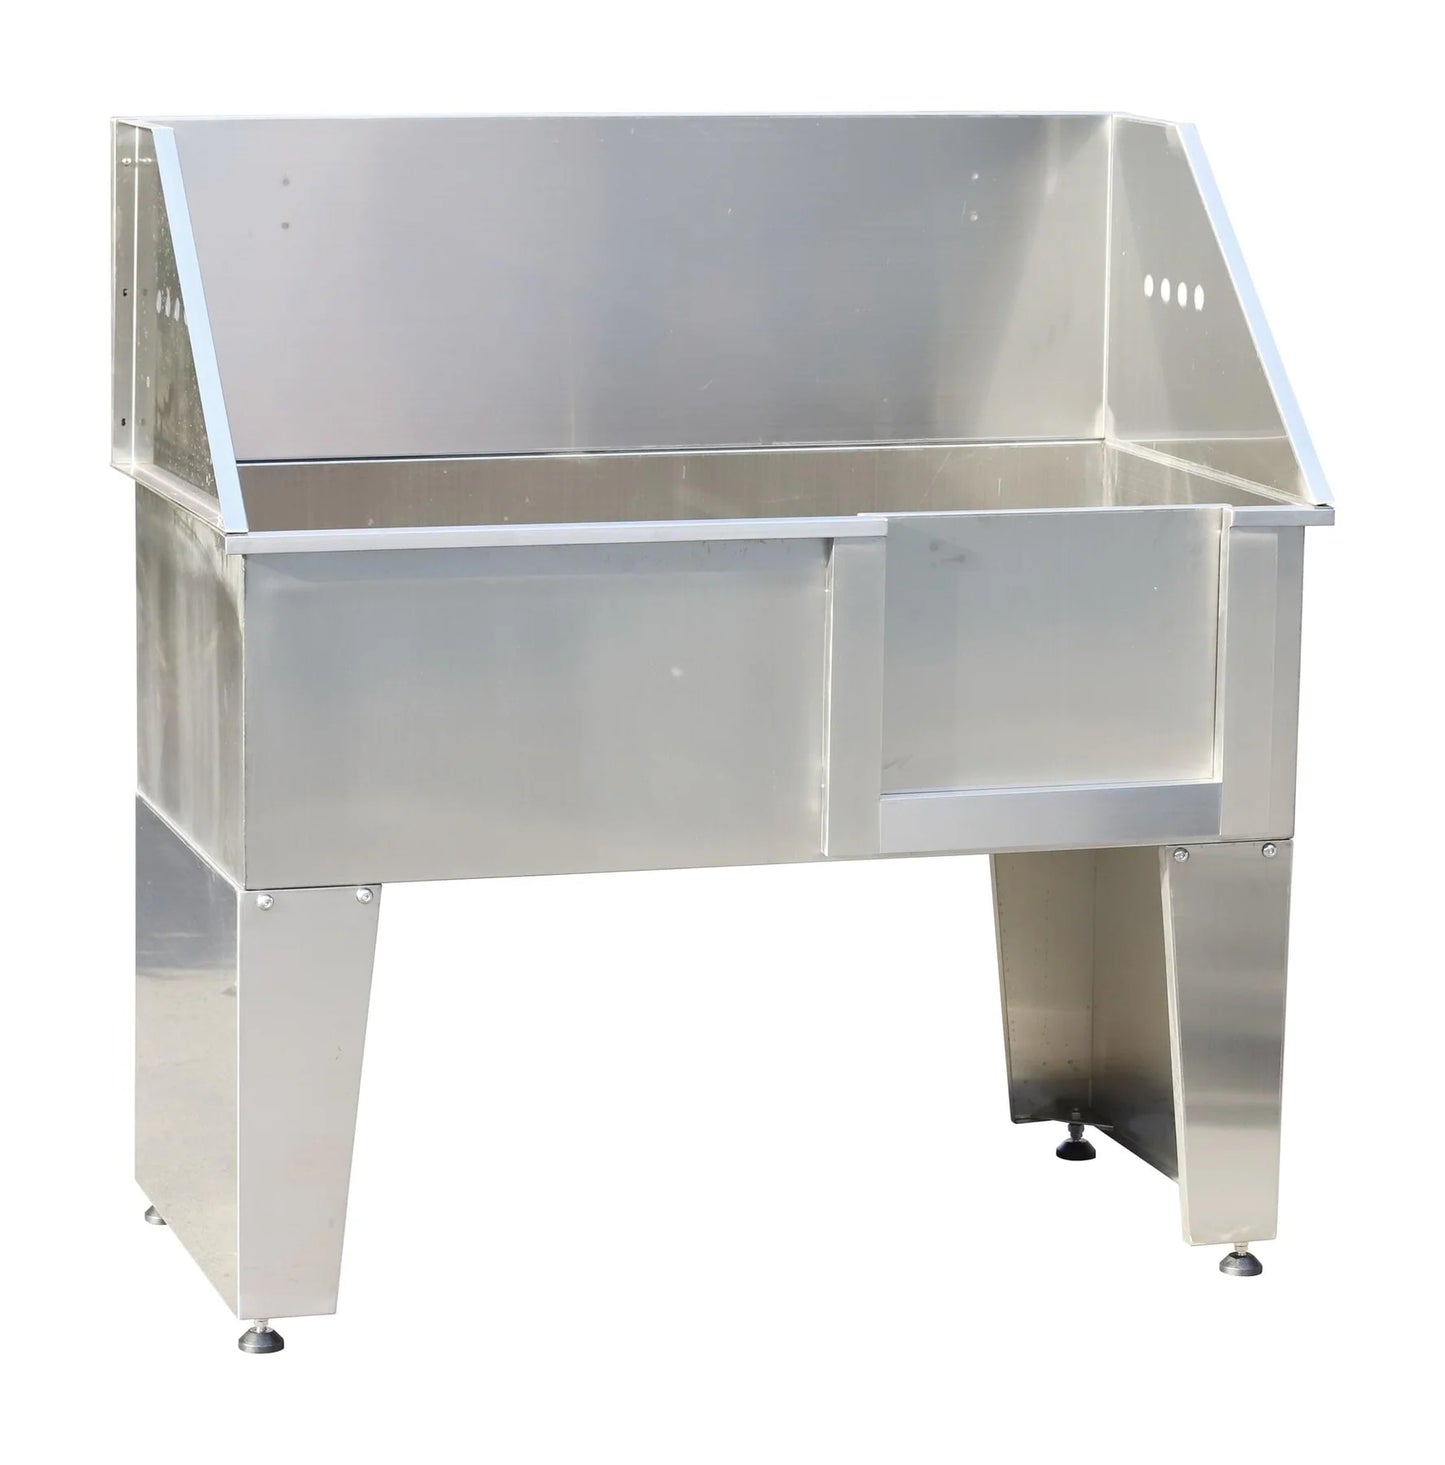 Aeolus Economical Fully Welded Stainless Steel Tub With Lifting Door